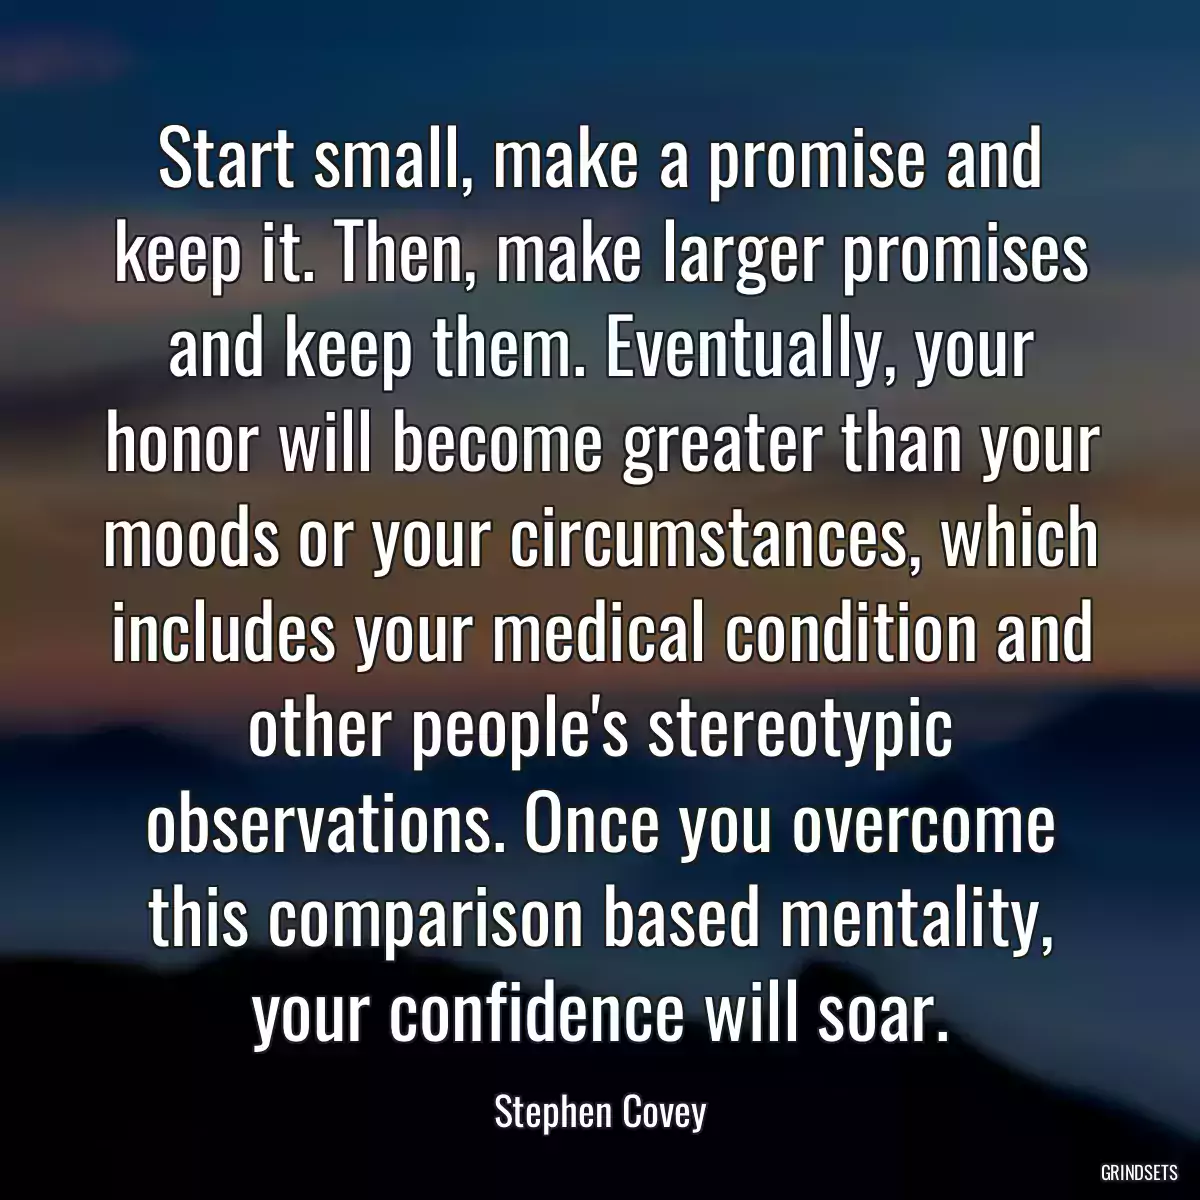 Start small, make a promise and keep it. Then, make larger promises and keep them. Eventually, your honor will become greater than your moods or your circumstances, which includes your medical condition and other people\'s stereotypic observations. Once you overcome this comparison based mentality, your confidence will soar.